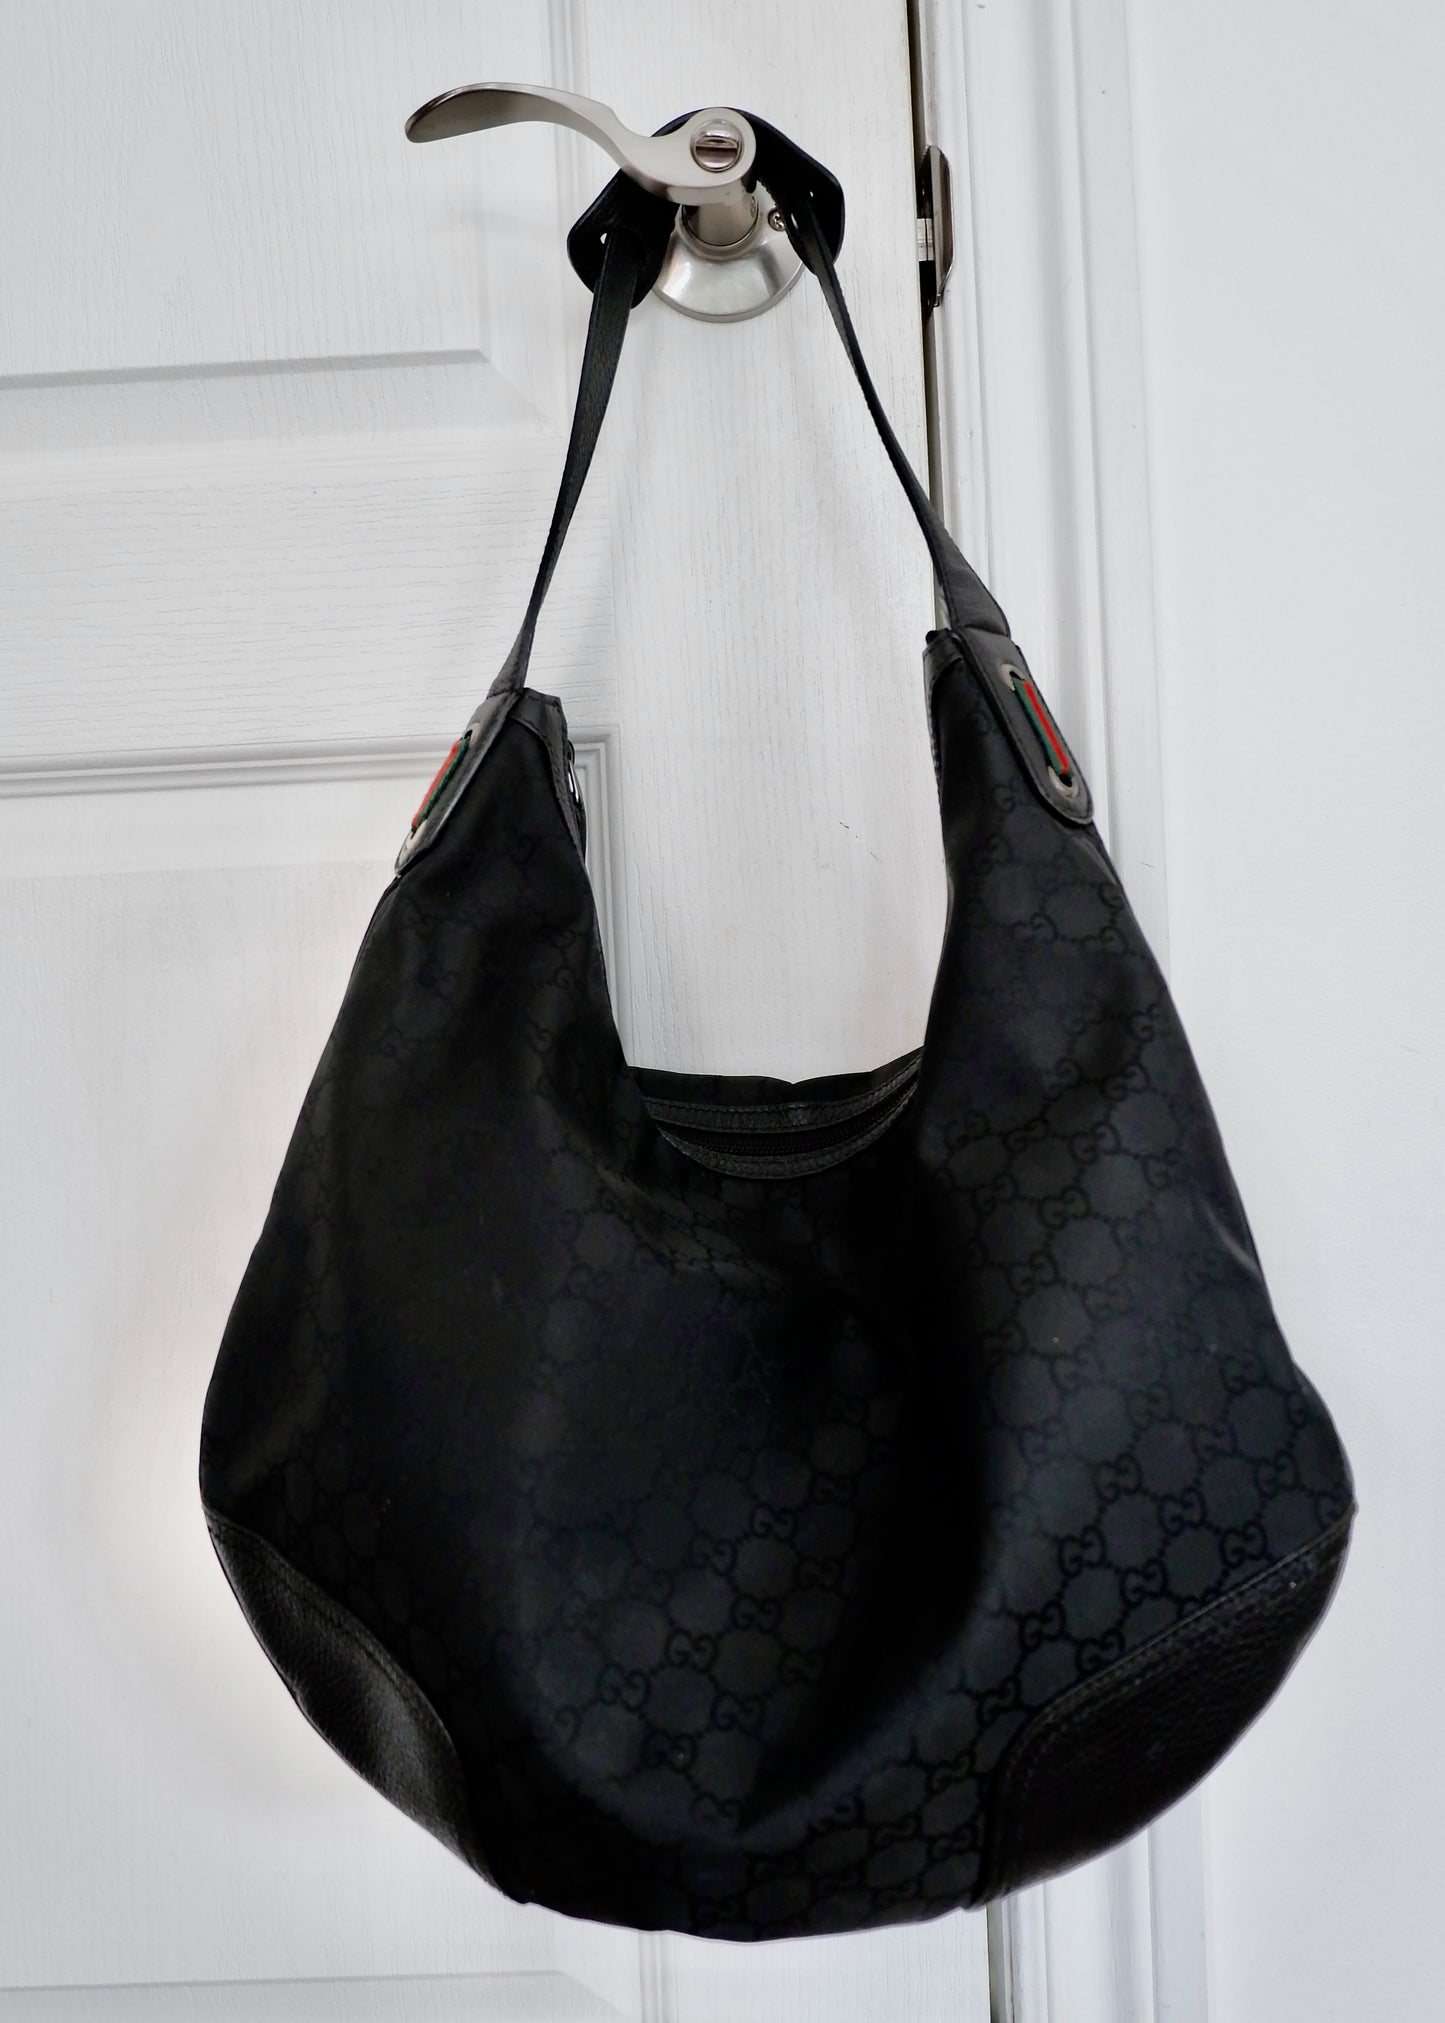 Authentic Preowned Gucci Nylon/Leather Hobo Shoulder Bag